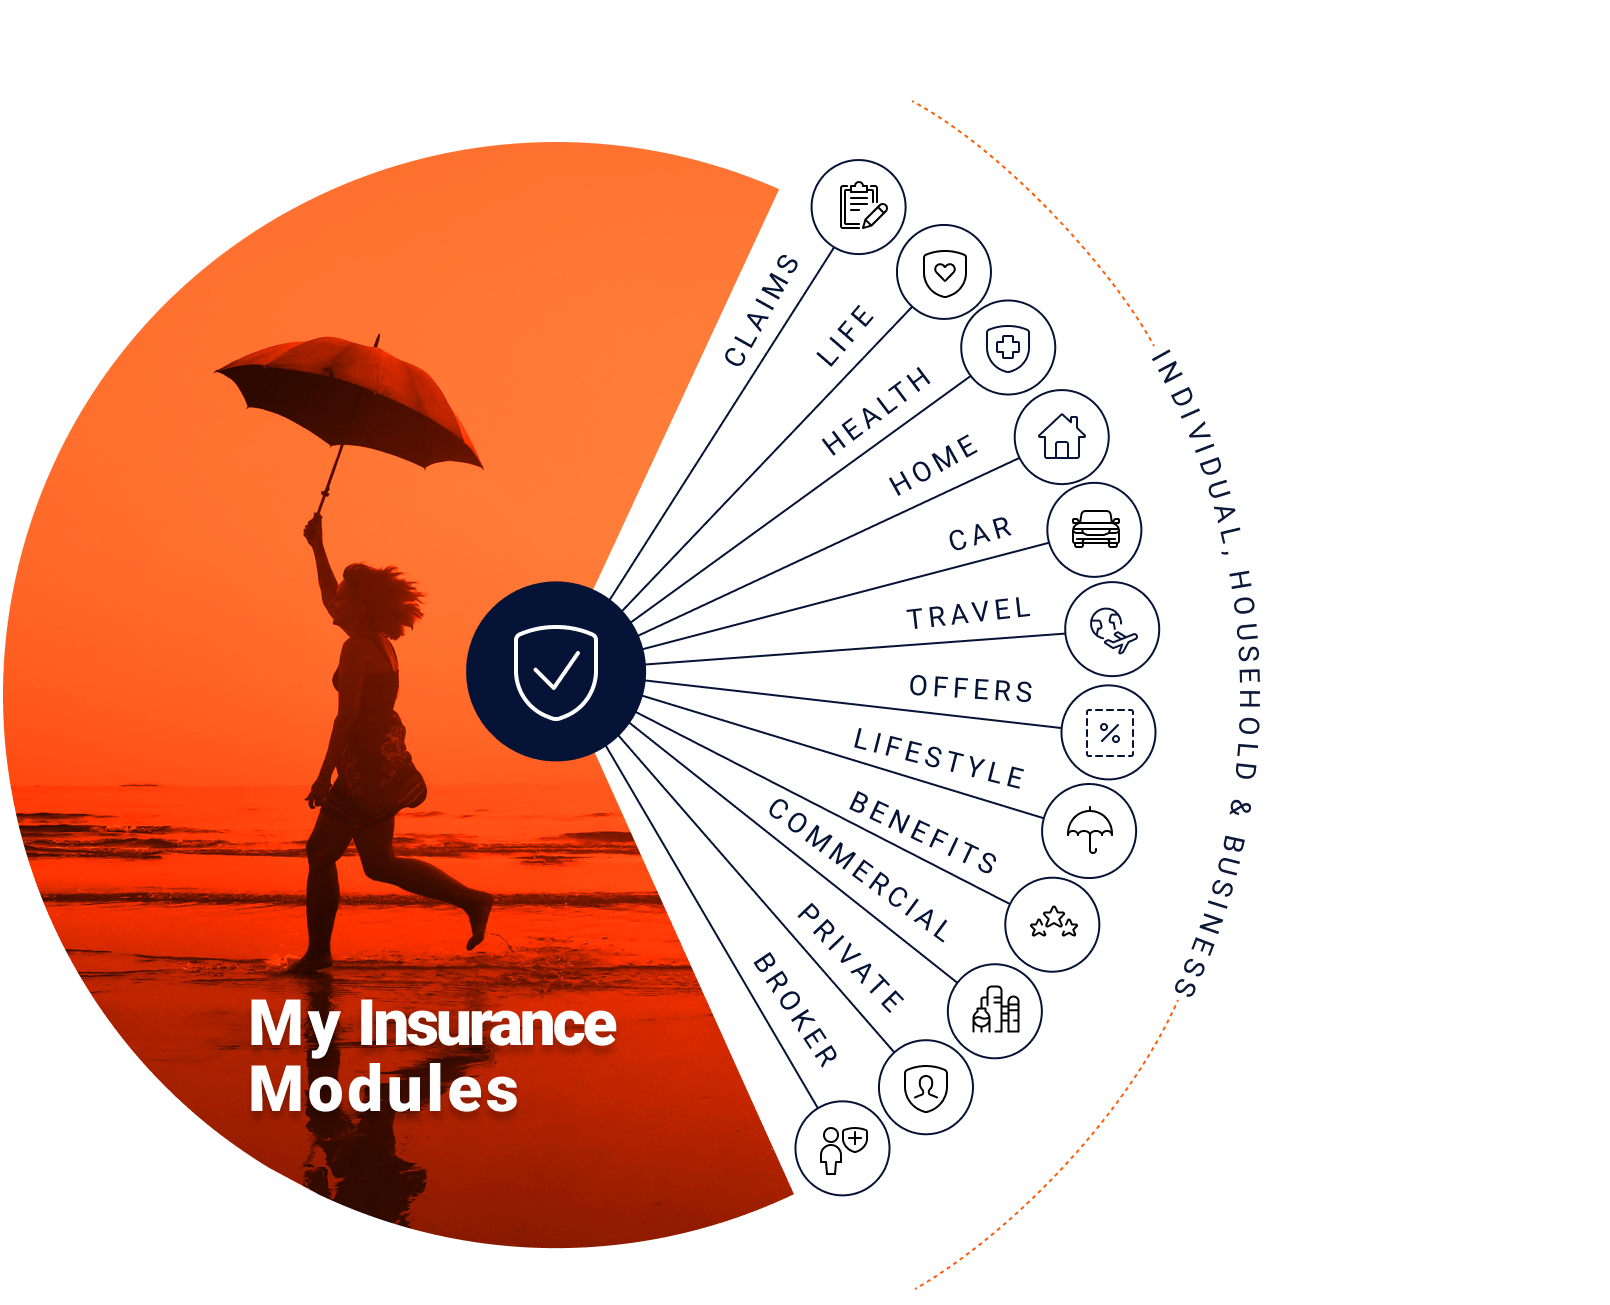 My Insurance Modules: Claims, Life, health, home, car, travel, offers, lifestyle, benefits, commercial, Private, and broker